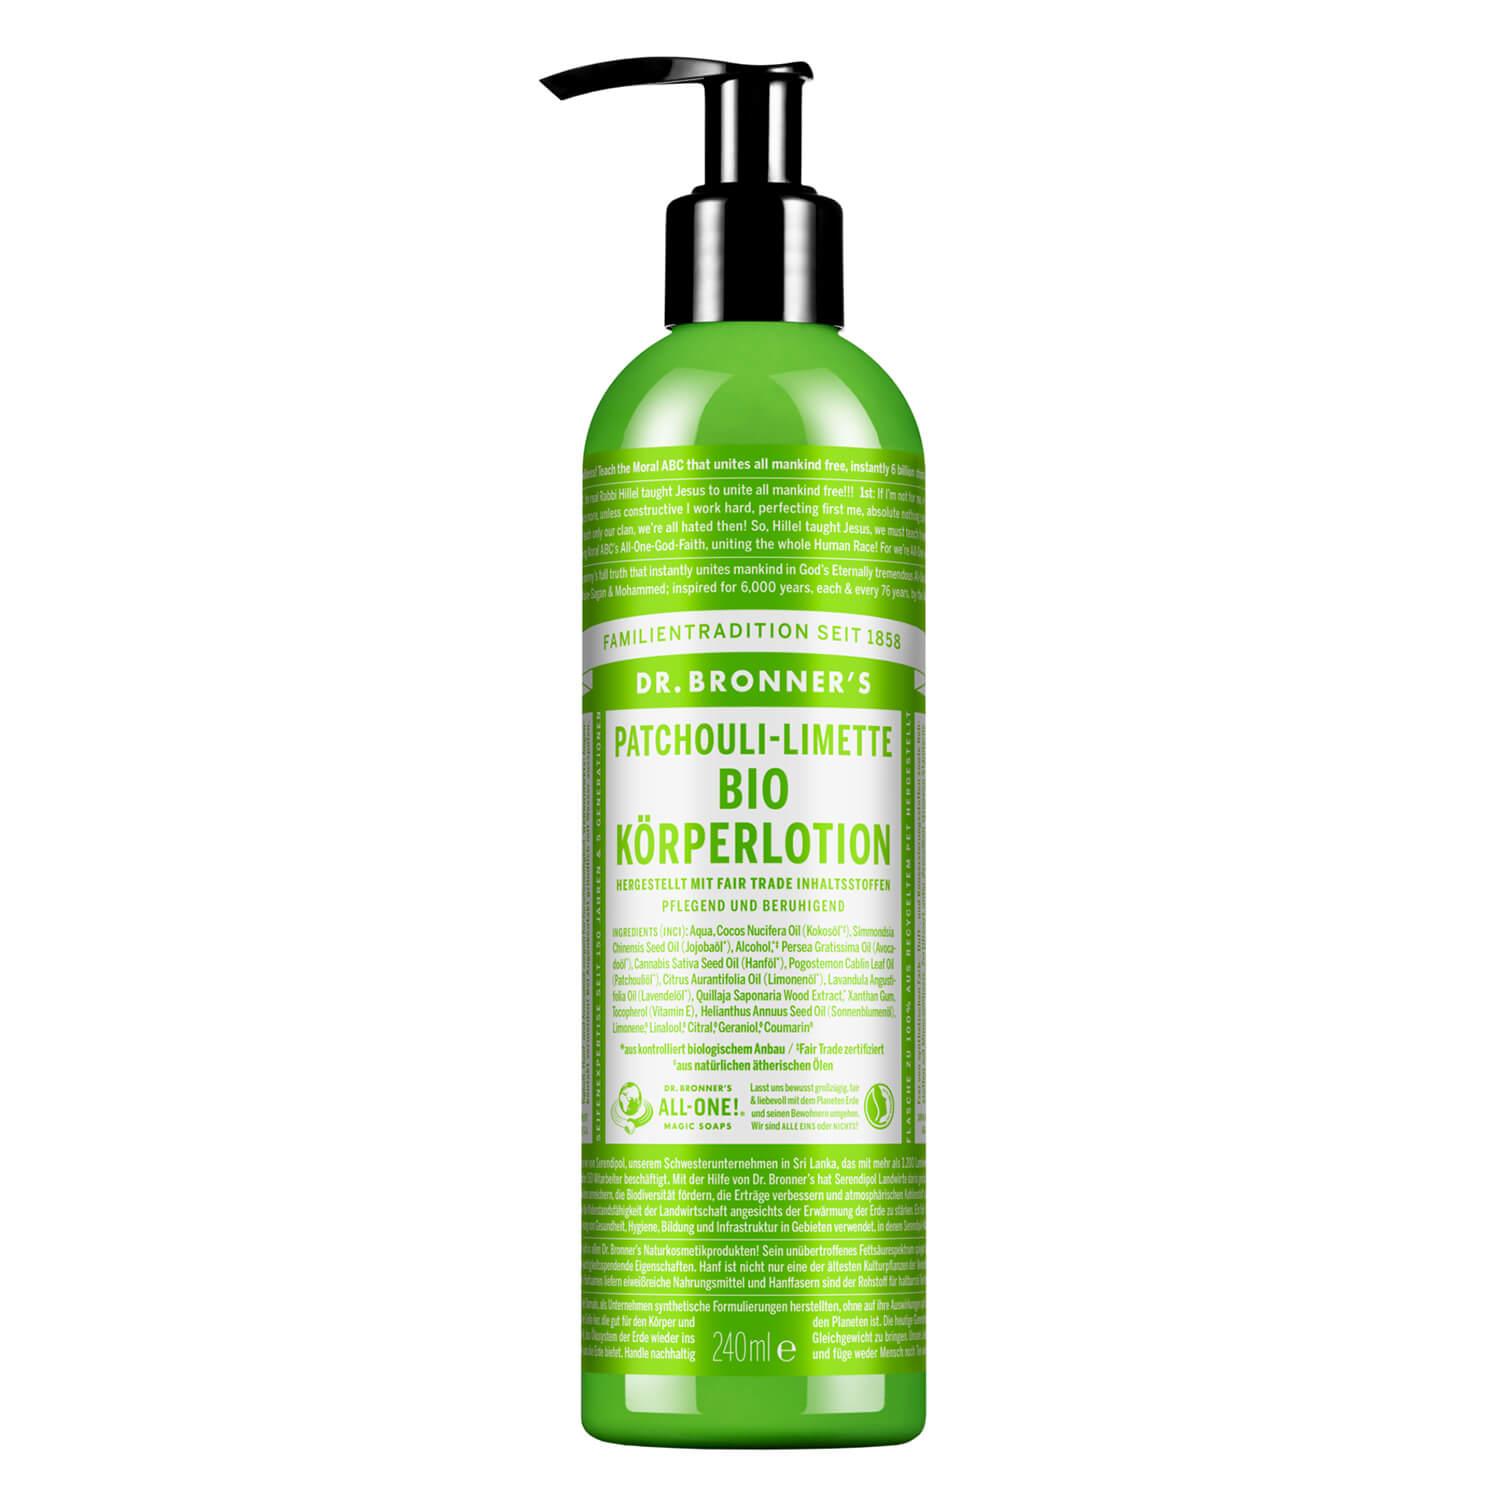 DR. BRONNER'S - Body Lotion Patchouli Lime